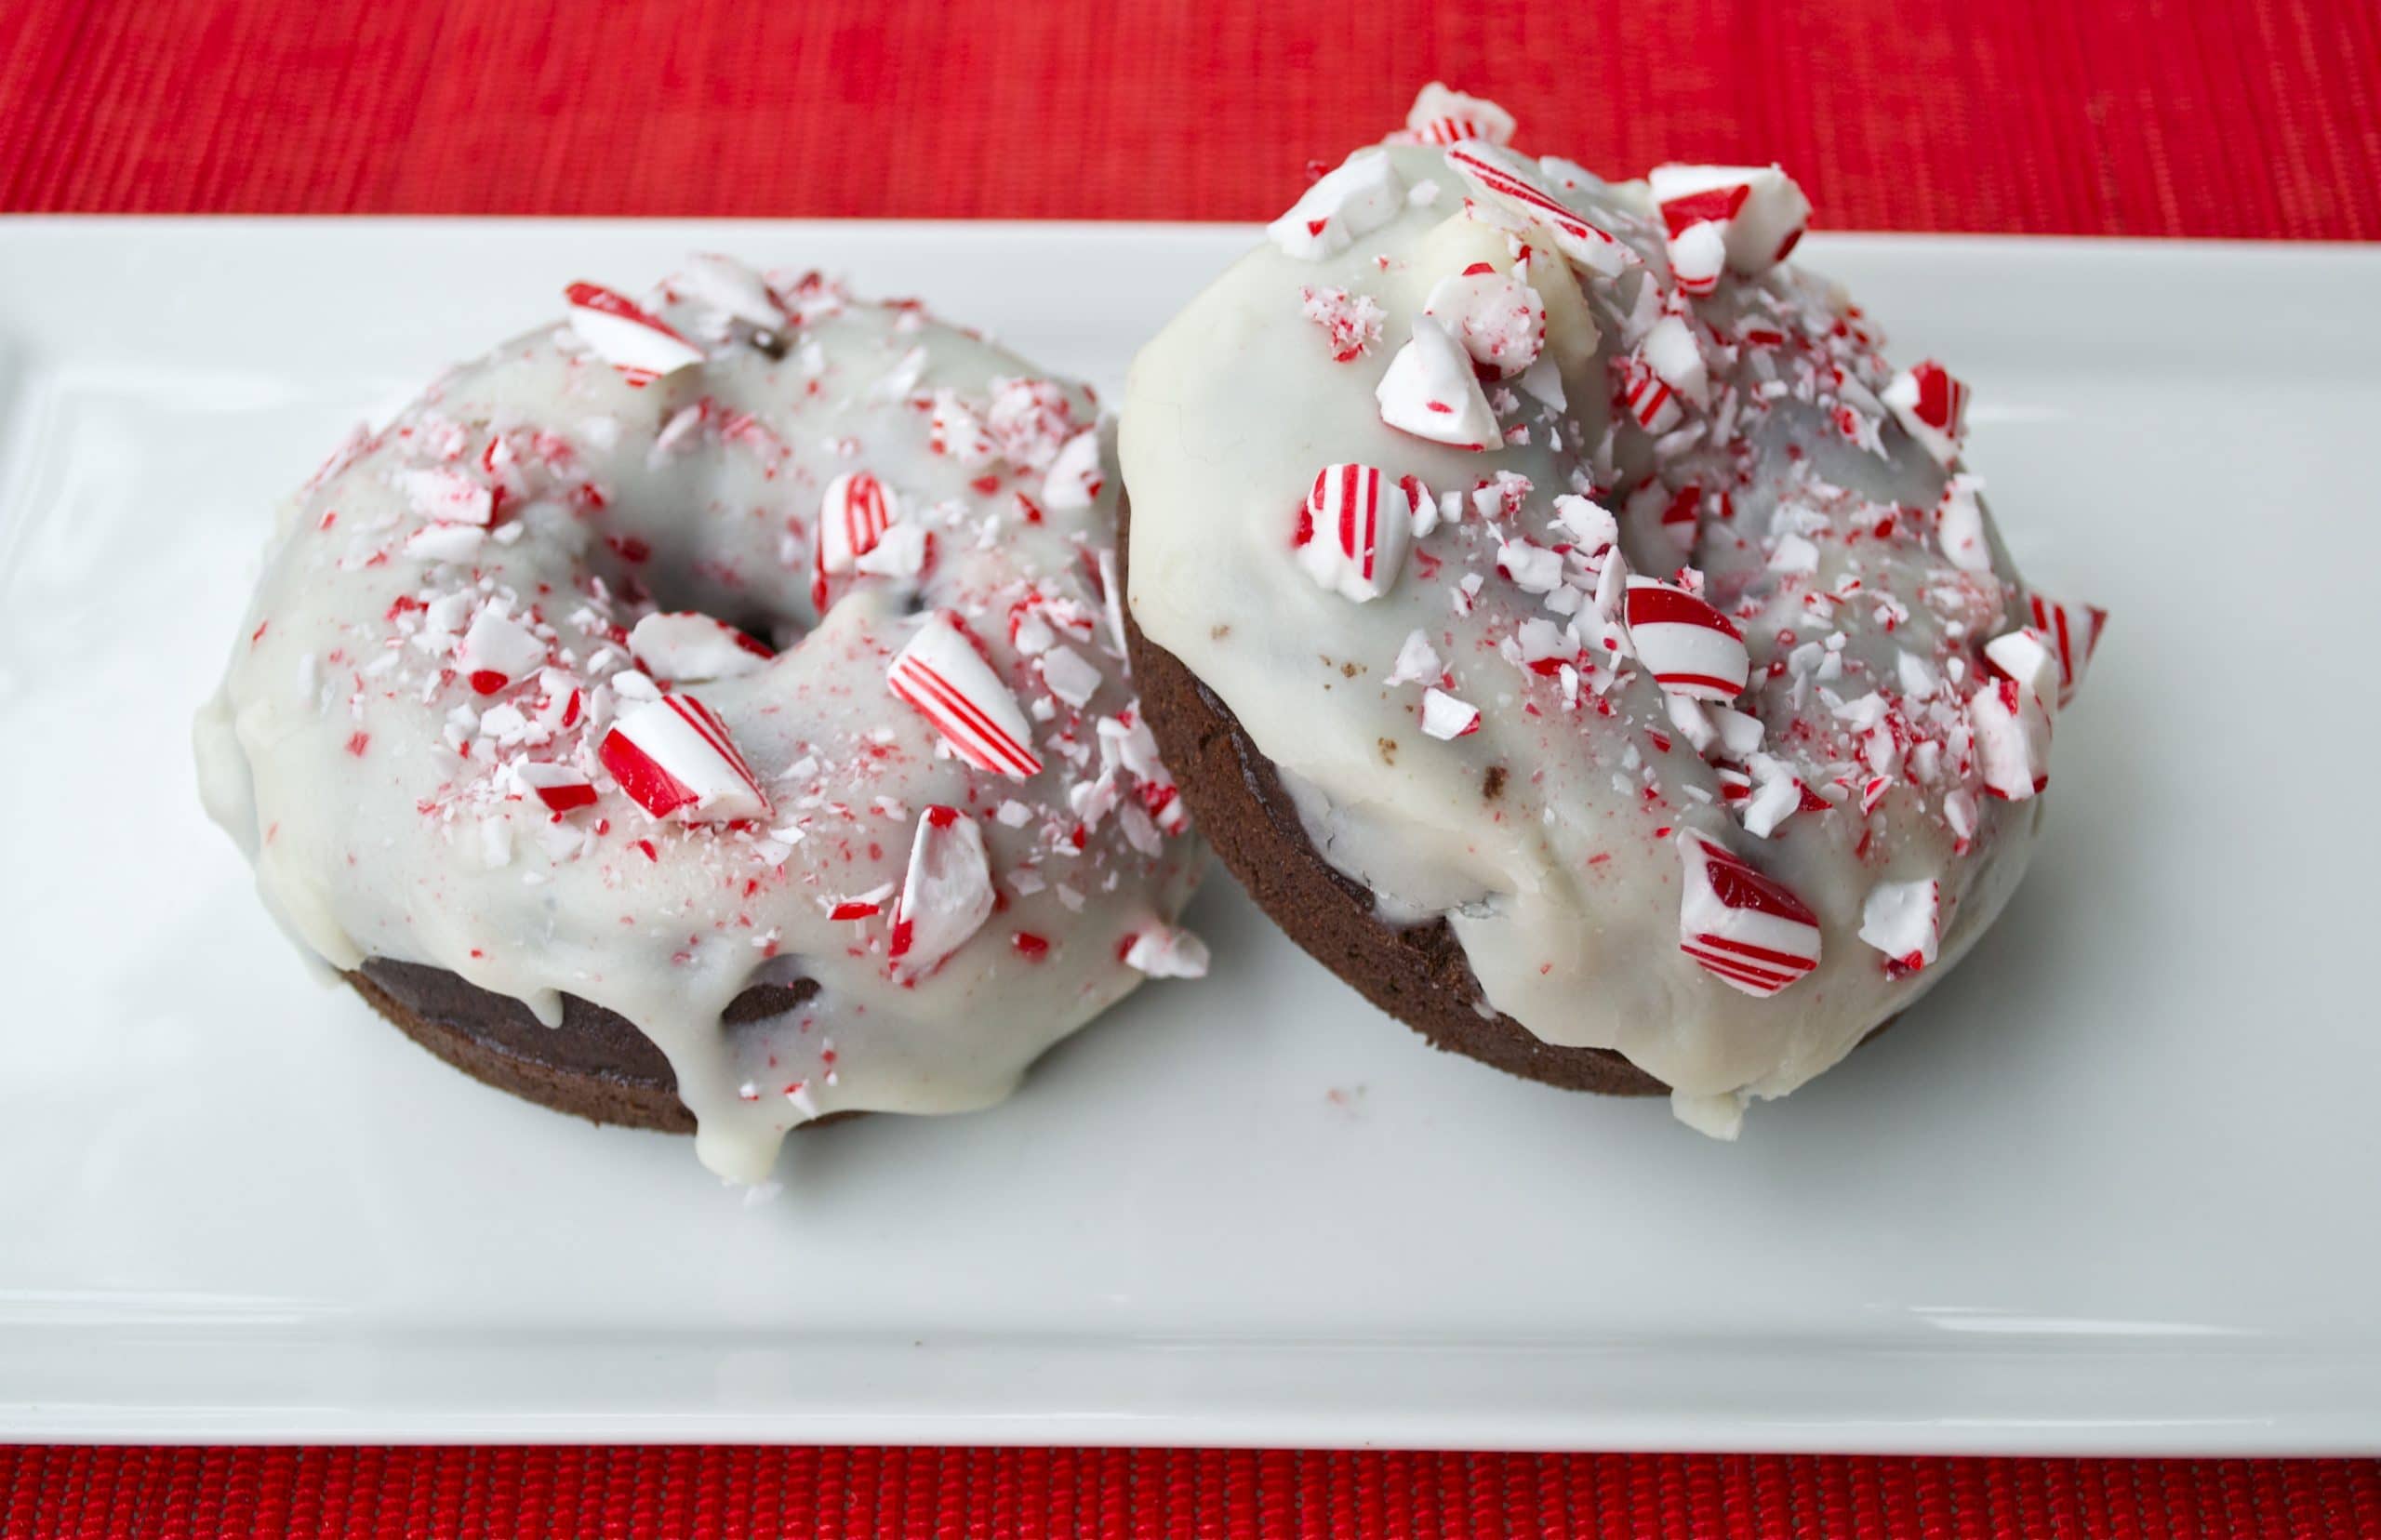 Gluten Free Chocolate Peppermint Donuts with White Chocolate Frosting